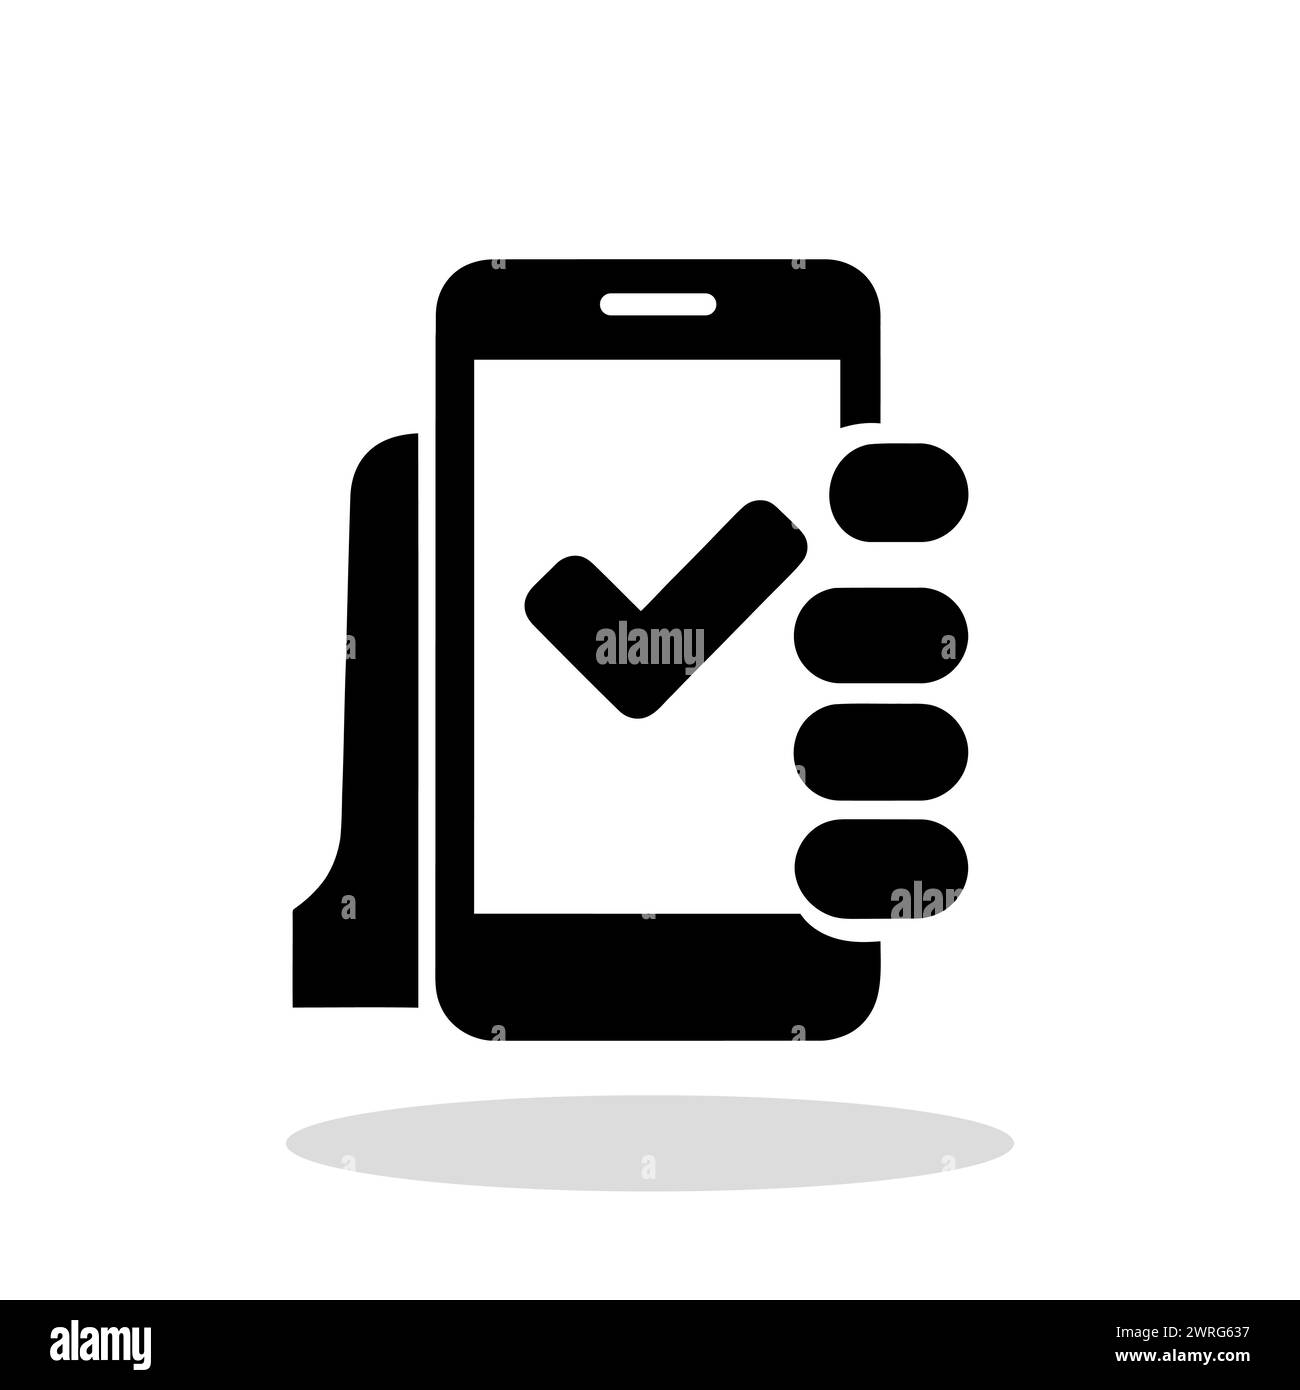 Phone icon. Black smartphone icon with a check mark. Approved symbol. Stock Vector